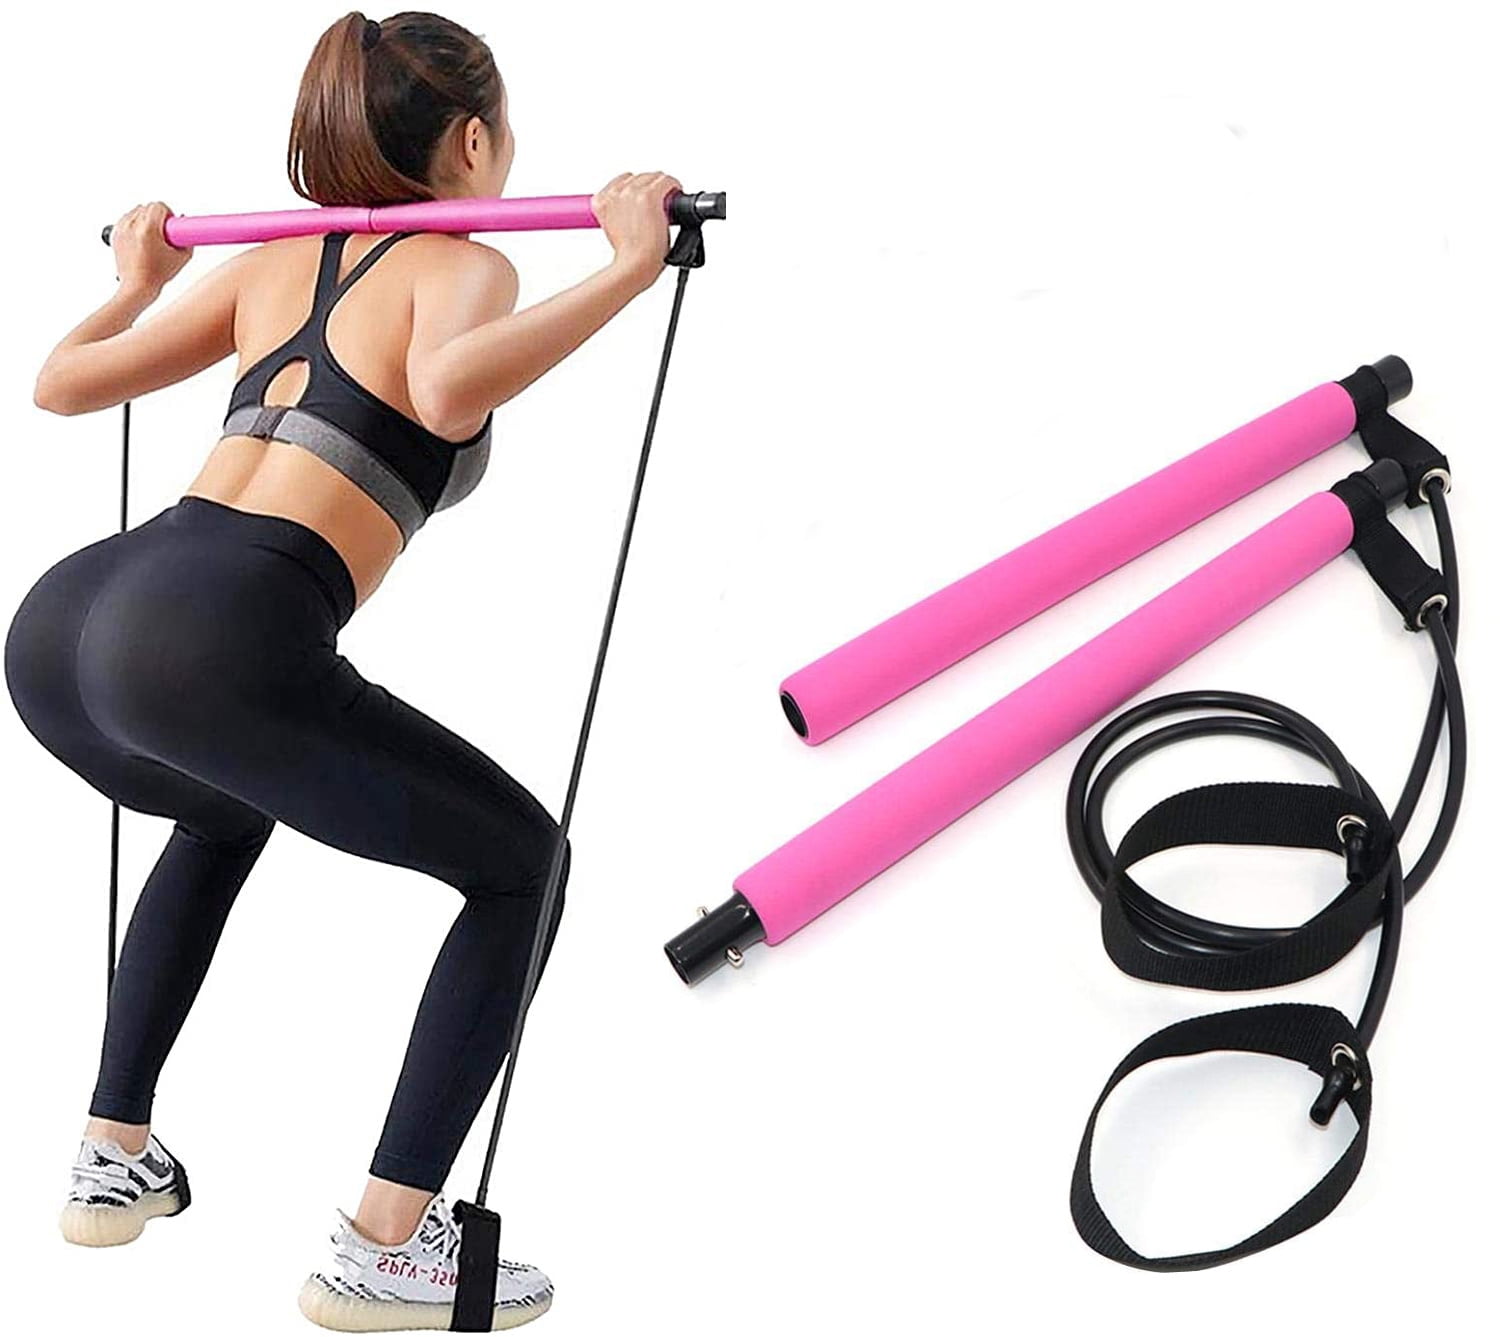 DREAM HORSE Pilates Exercise Resistance Bands Yoga Pilates Bar Kit Muscle Toning Bar Portable Home Gym Pilates Body Shaping Pilates Stick with Foot Loop for Full Body Workout 